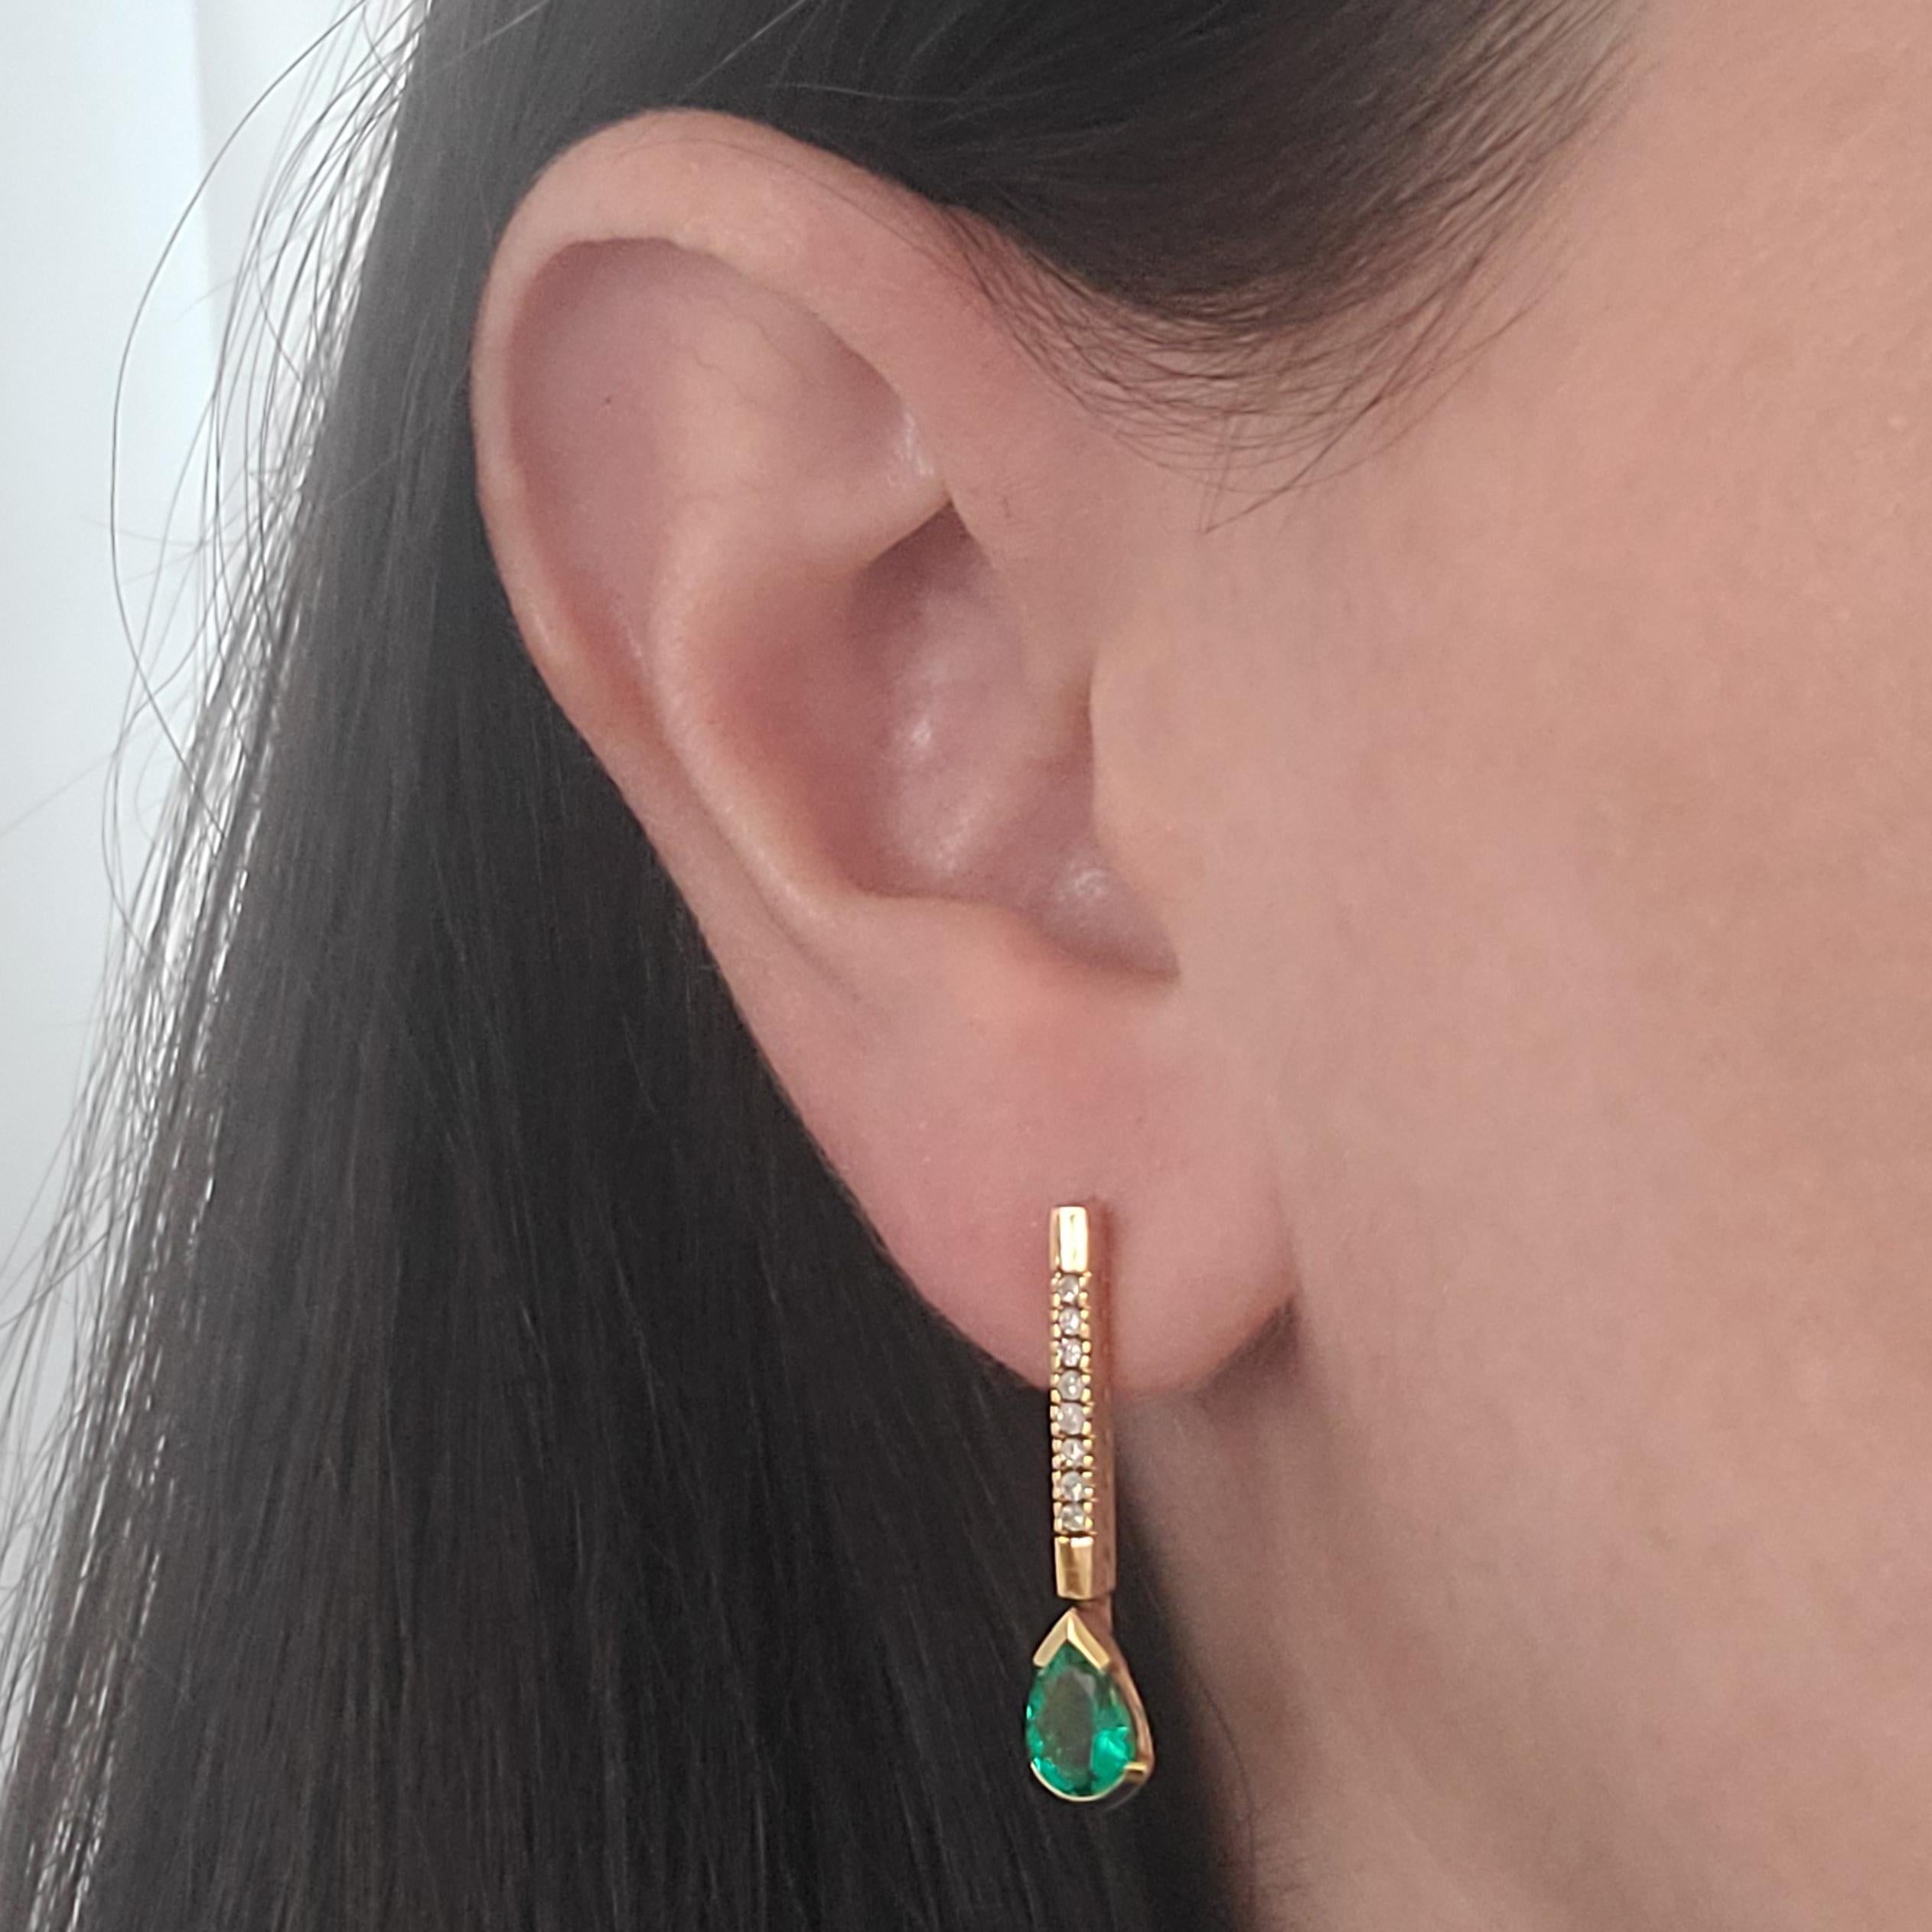 14 Karat Yellow Gold Drop Earrings Featuring 2 Pear Cut Colombian Emeralds Totaling Approximately 1.10 Carats Accented By 16 Round Diamonds Totaling An Additional 0.16 Carats. GIA Report #5222342191. Pierced Post With Friction Back. 1.12 Inch